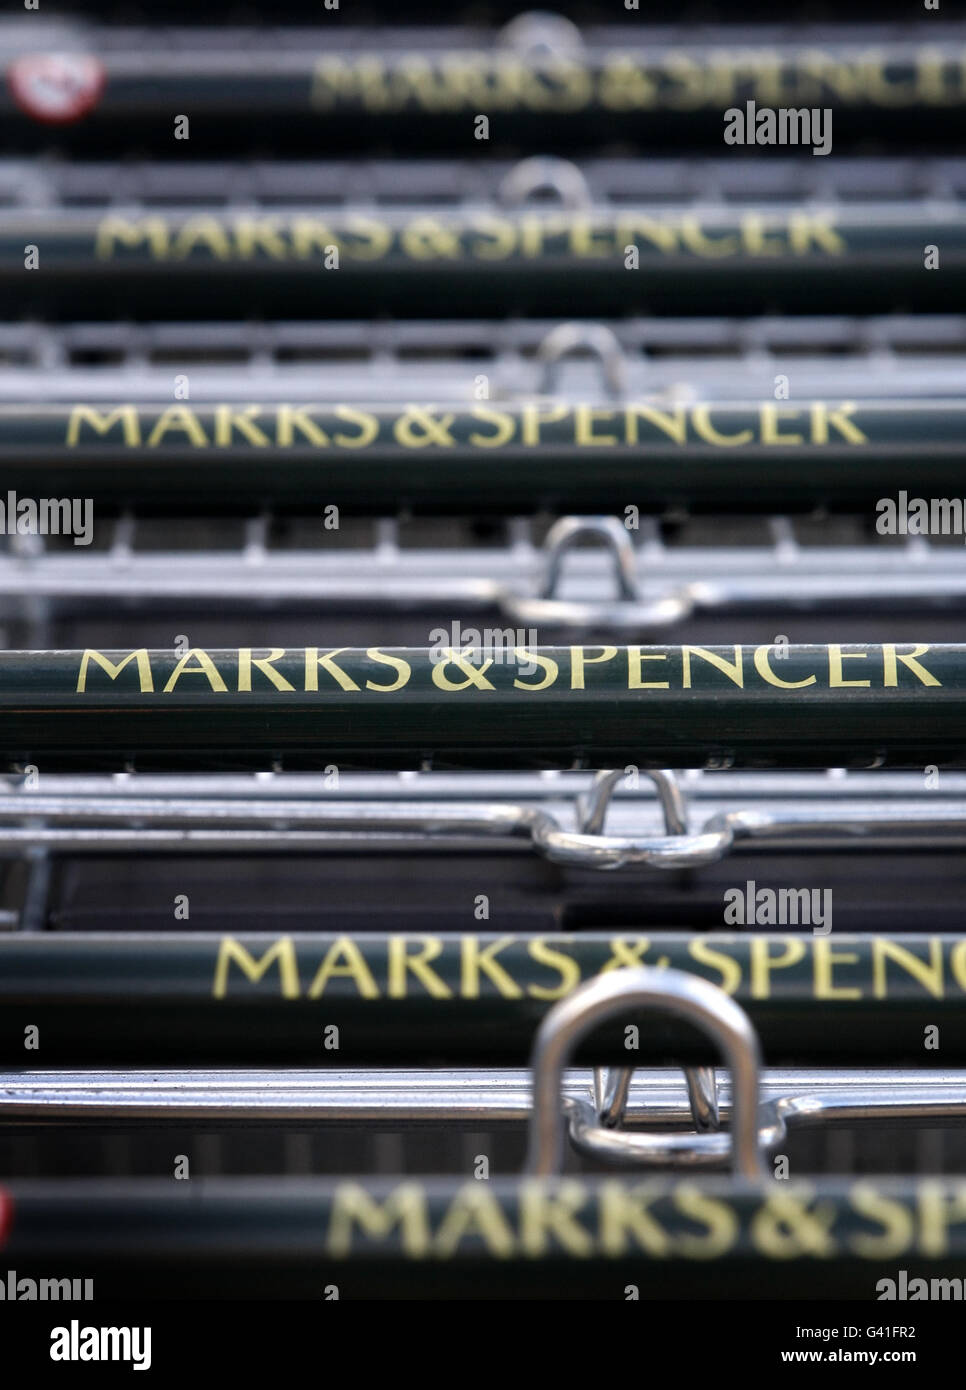 Stock photograph showing shopping trolleys outside a Marks and Spencer shop in Dunblane, Scotland. Stock Photo